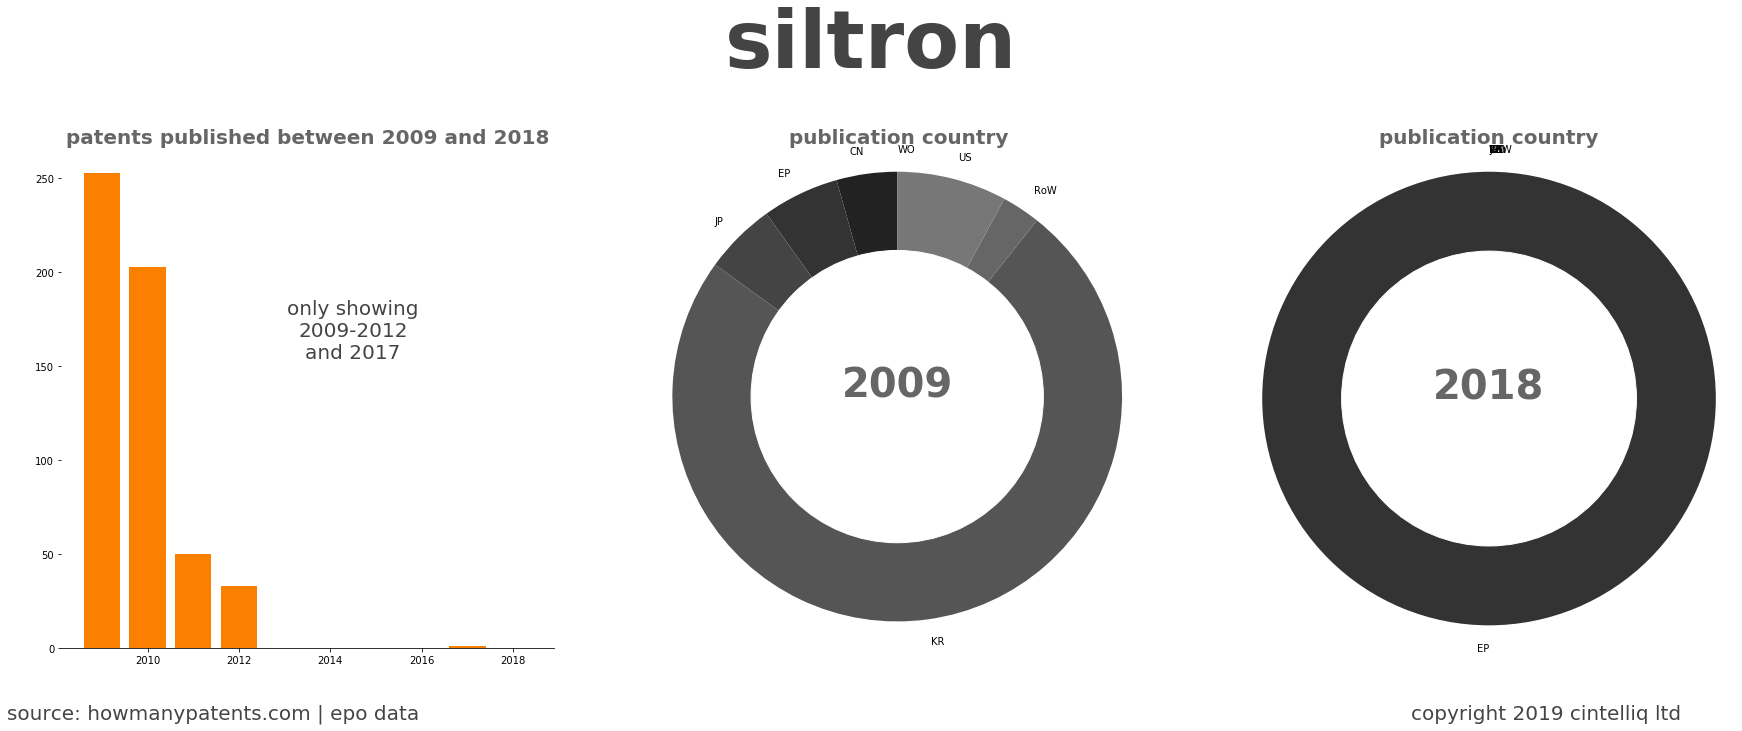 summary of patents for Siltron